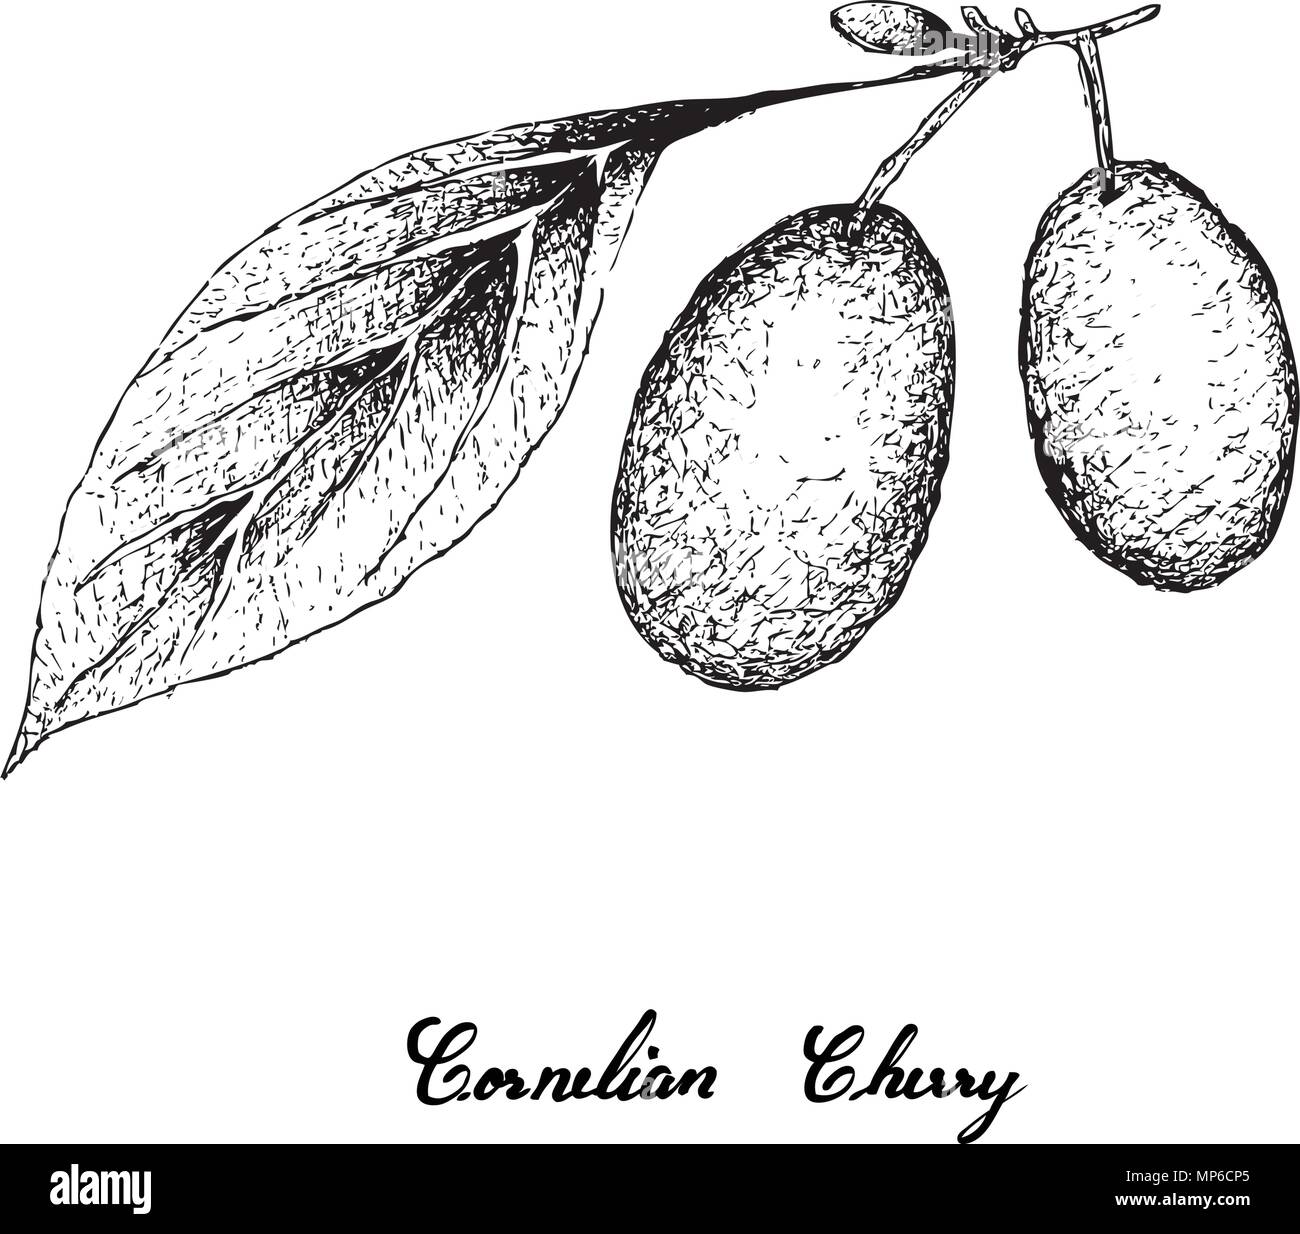 Tropical Fruits, Illustration of Hand Drawn Sketch Fresh Cornelian Cherries or Cornus Mas Fruits Hanging on Tree Branch Isolated on White Background.  Stock Vector